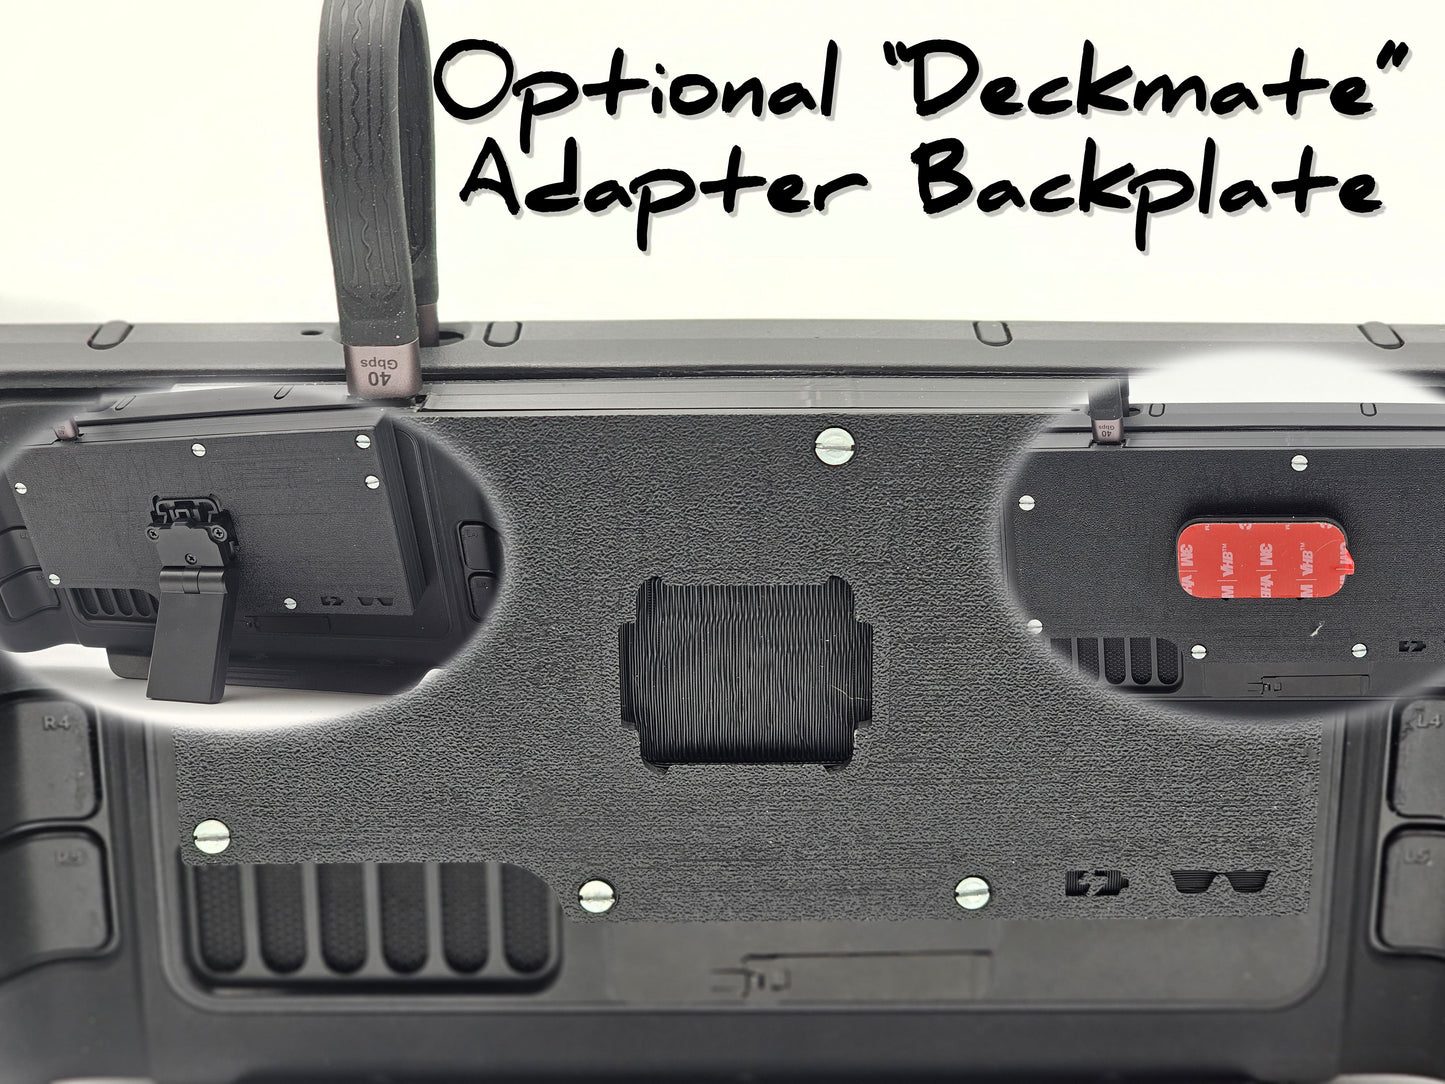 Steam Deck Redmagic Adapter Mount - Options For Multiple Cases